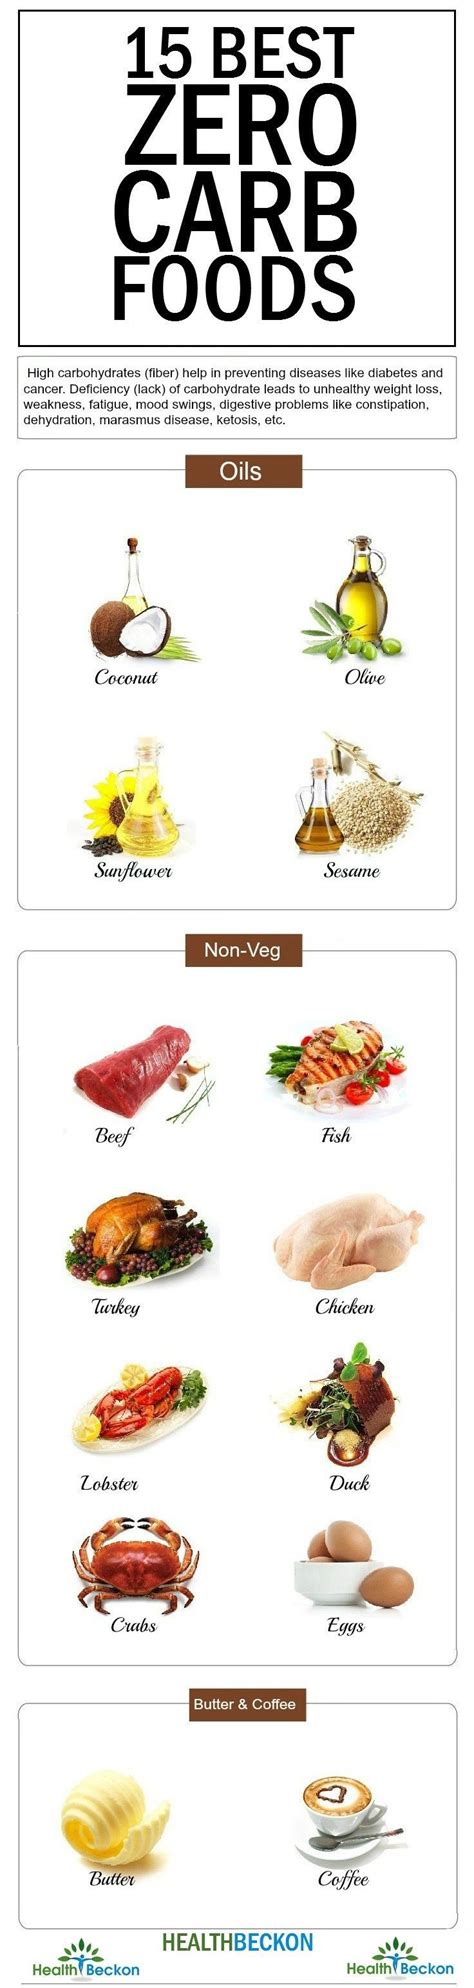 Zero Carb Diet 15 Best Zero Carb Foods List As The Name Suggests The